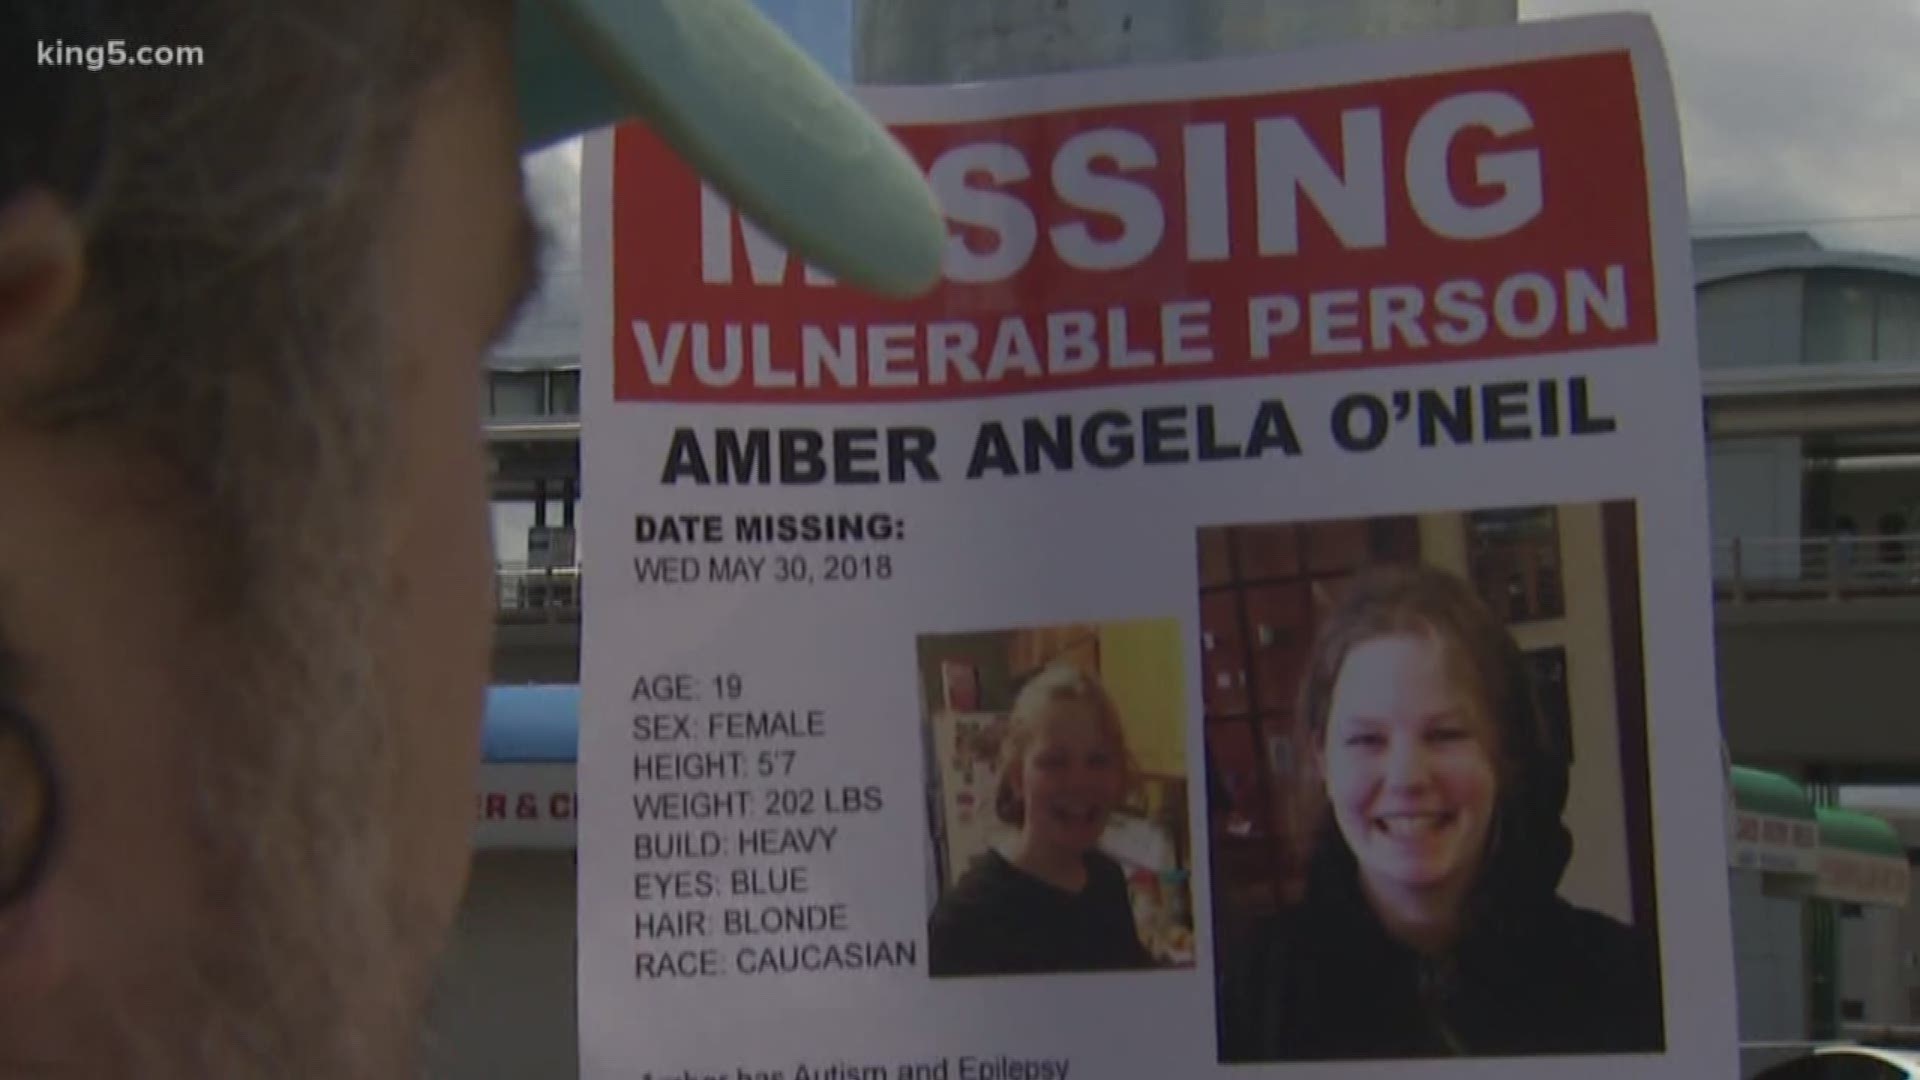 The Seattle Police Department is trying to find a missing 19-year-old woman with autism who disappeared a week ago.